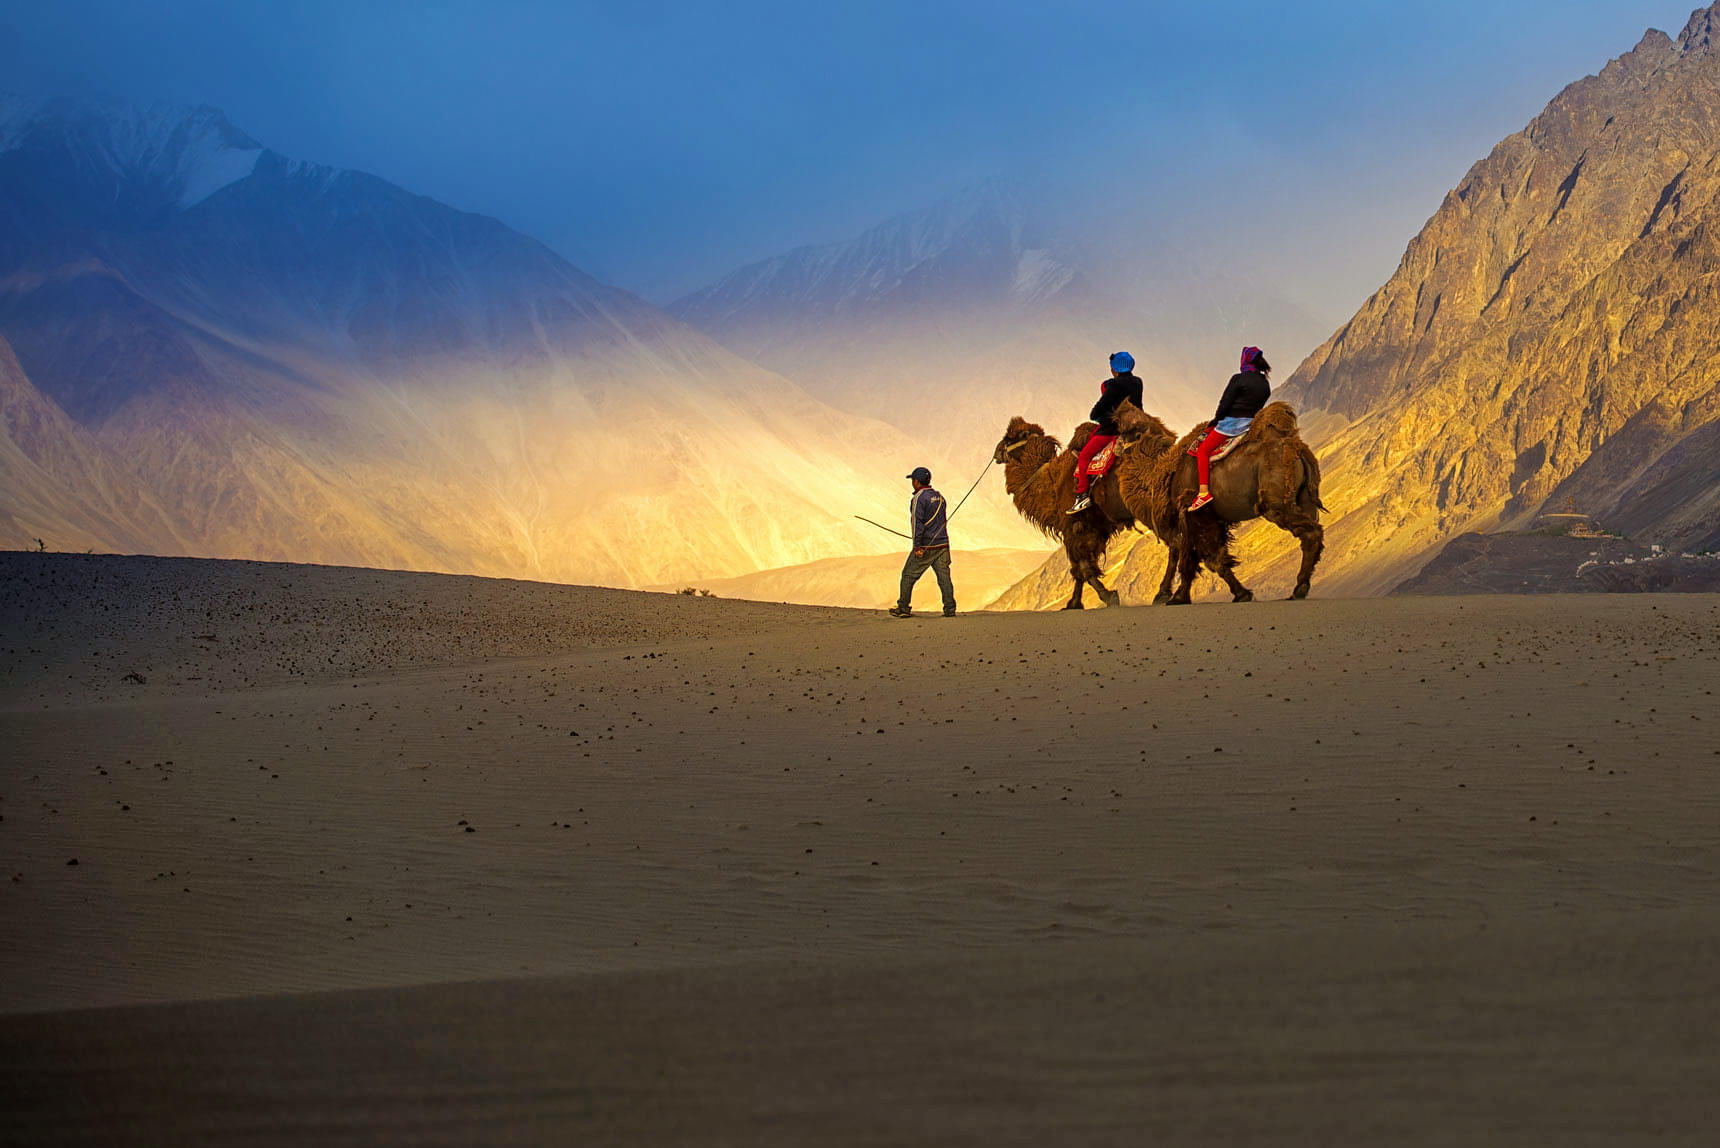 Take a thrilling riding of Bactrian camel which is known for its characteristic two humps